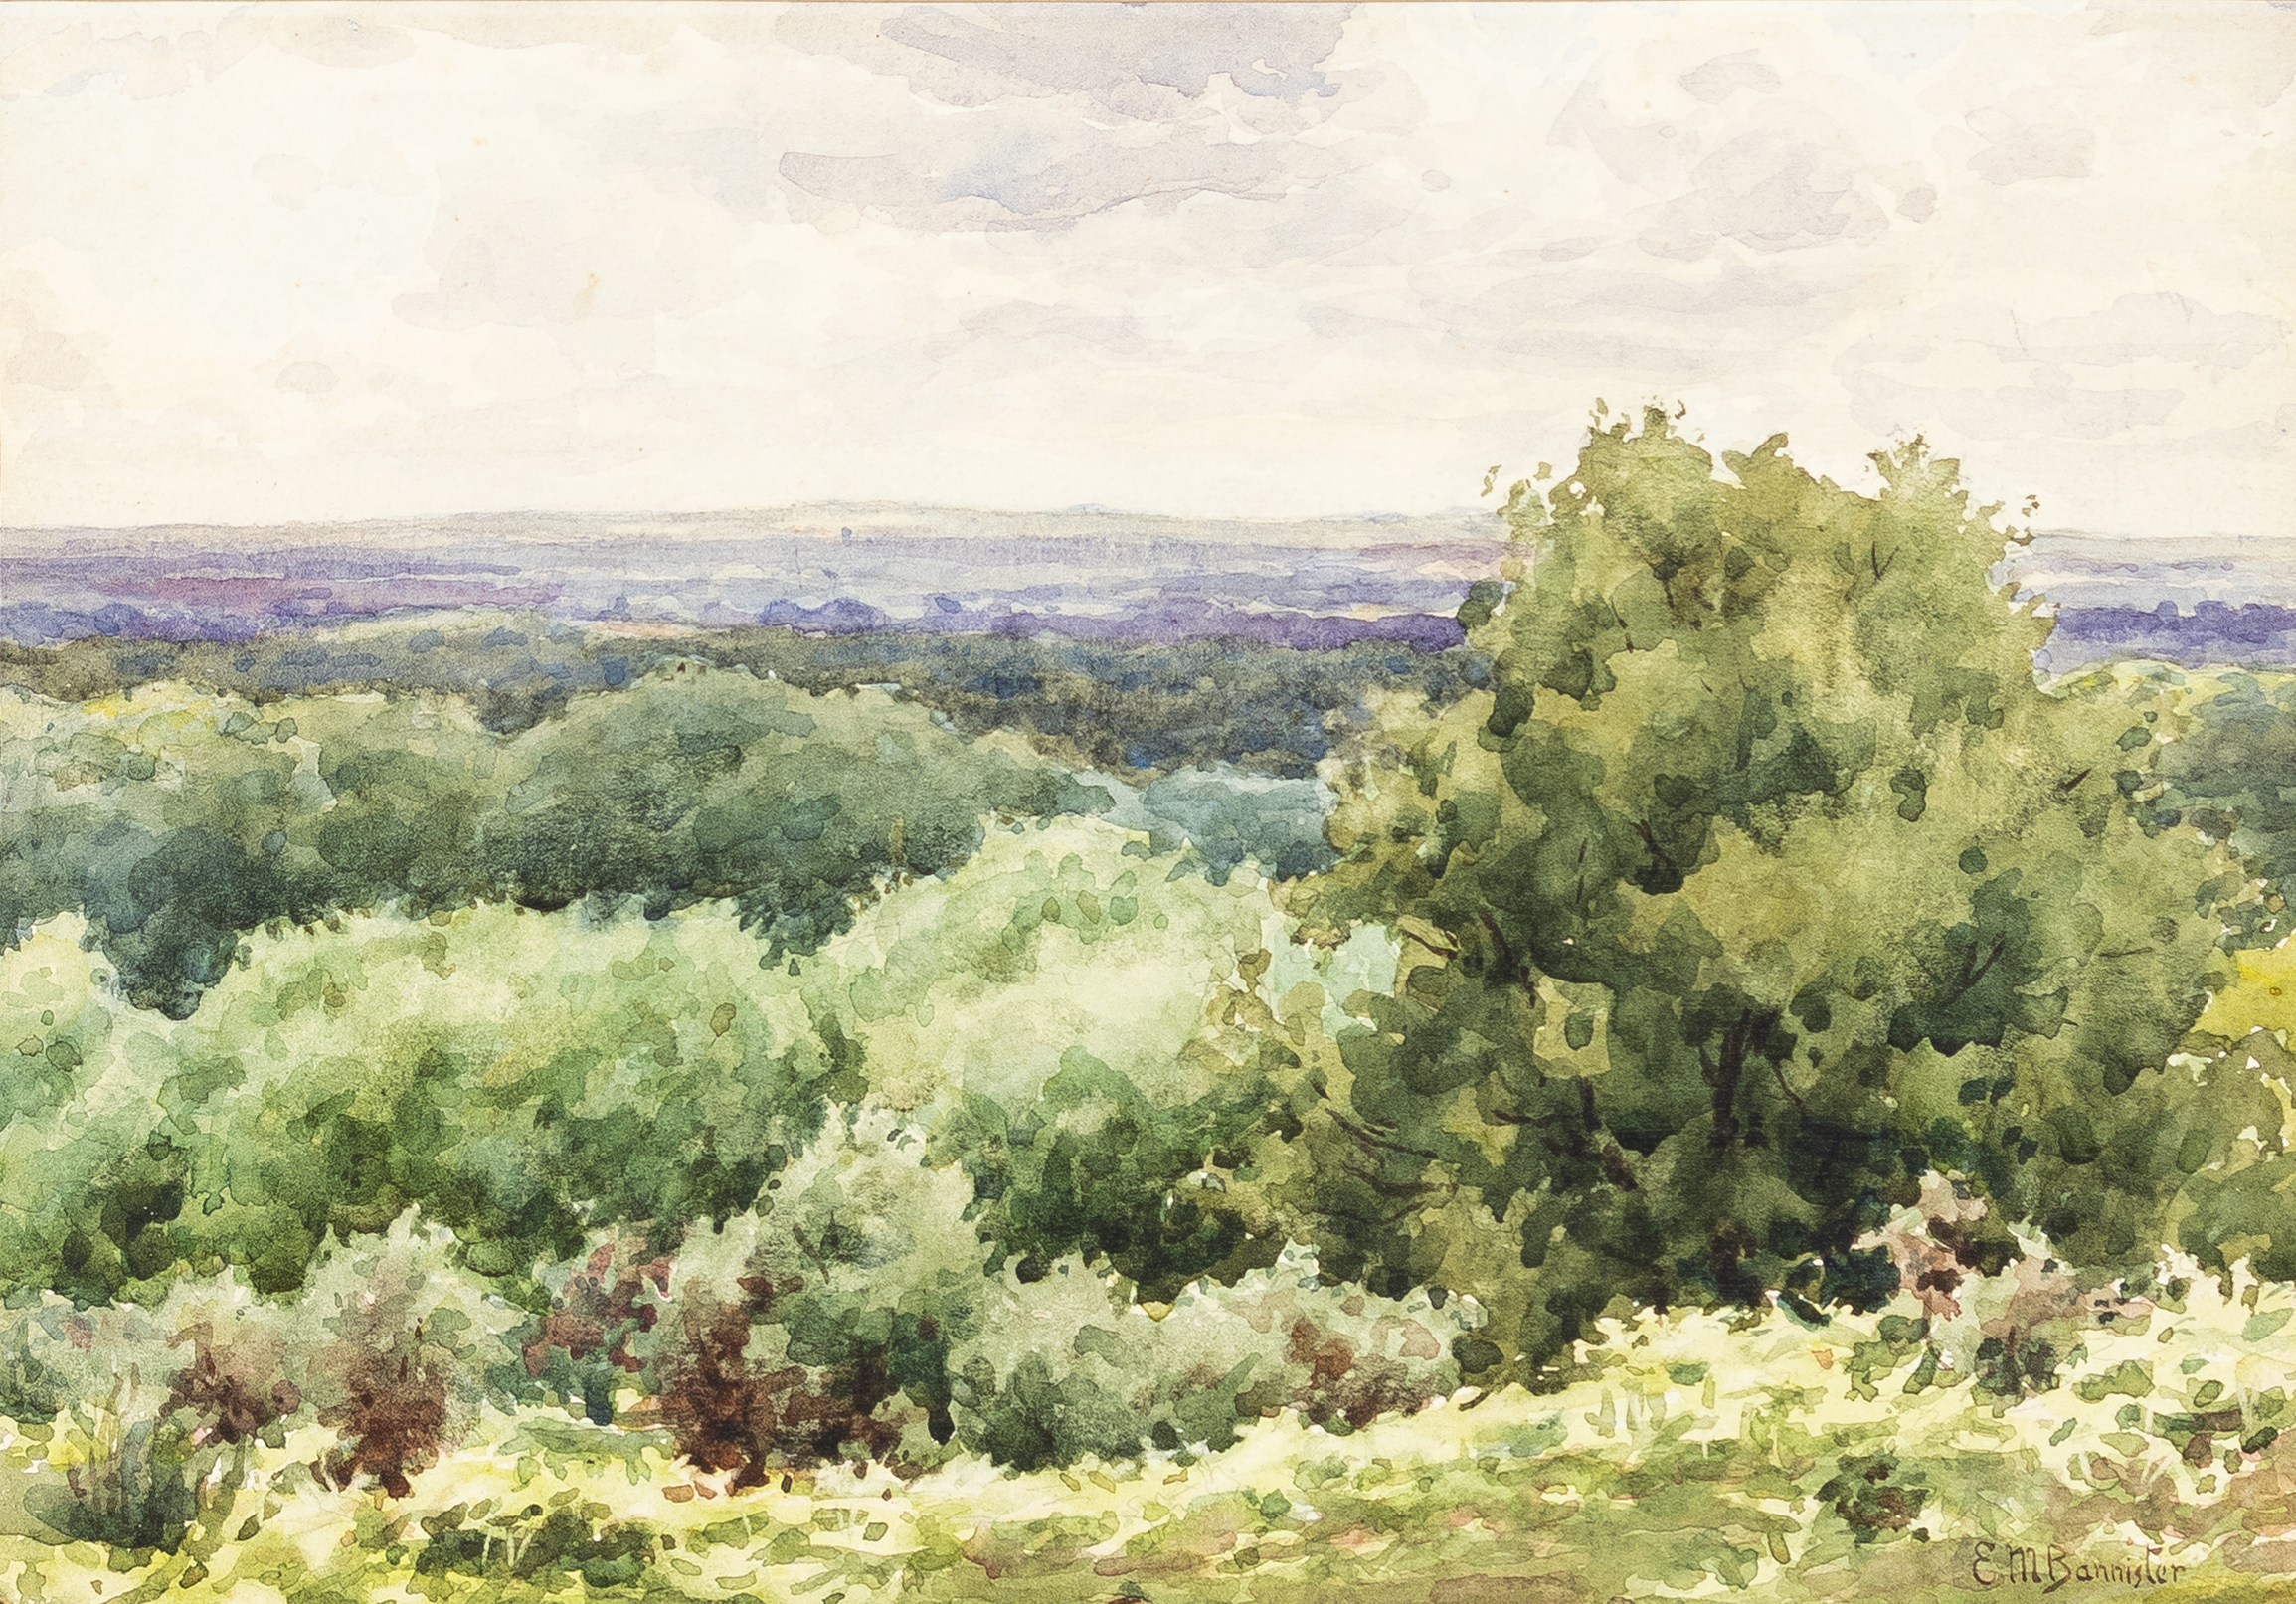 An Impressionistic Landscape Painting By Edward Bannister.